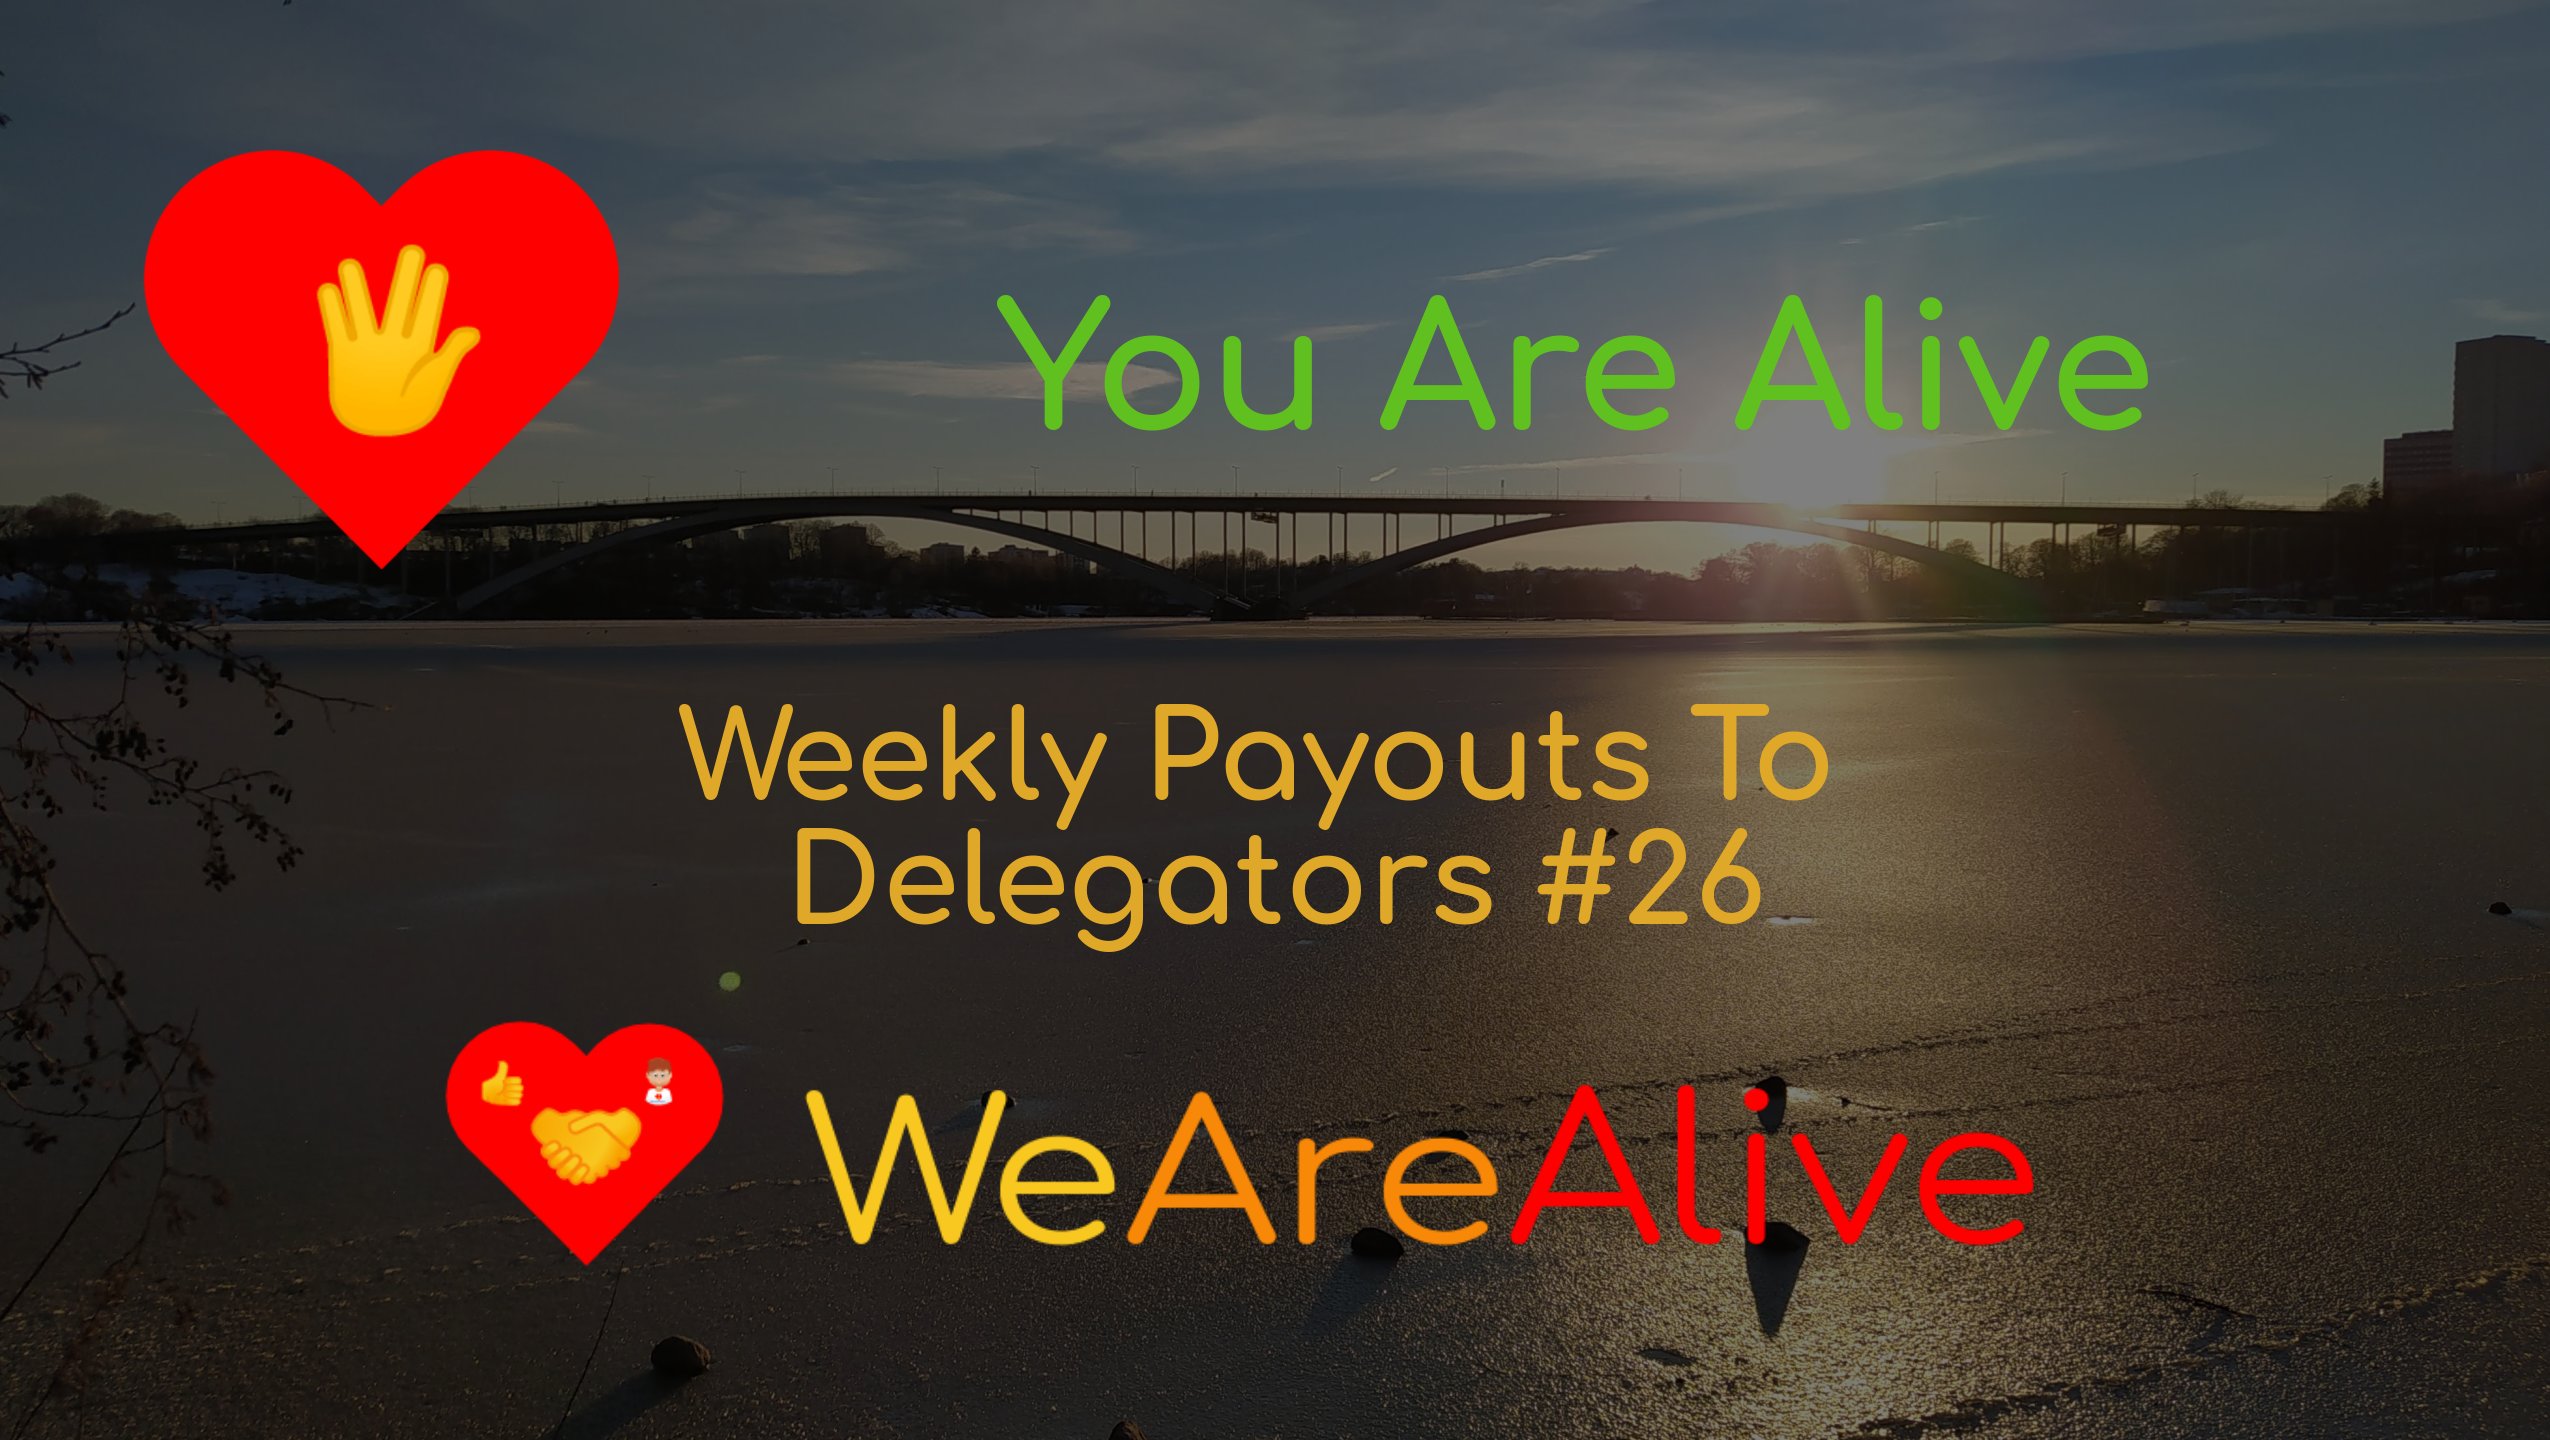 @youarealive/you-are-alive-weekly-payouts-to-hp-delegators-26